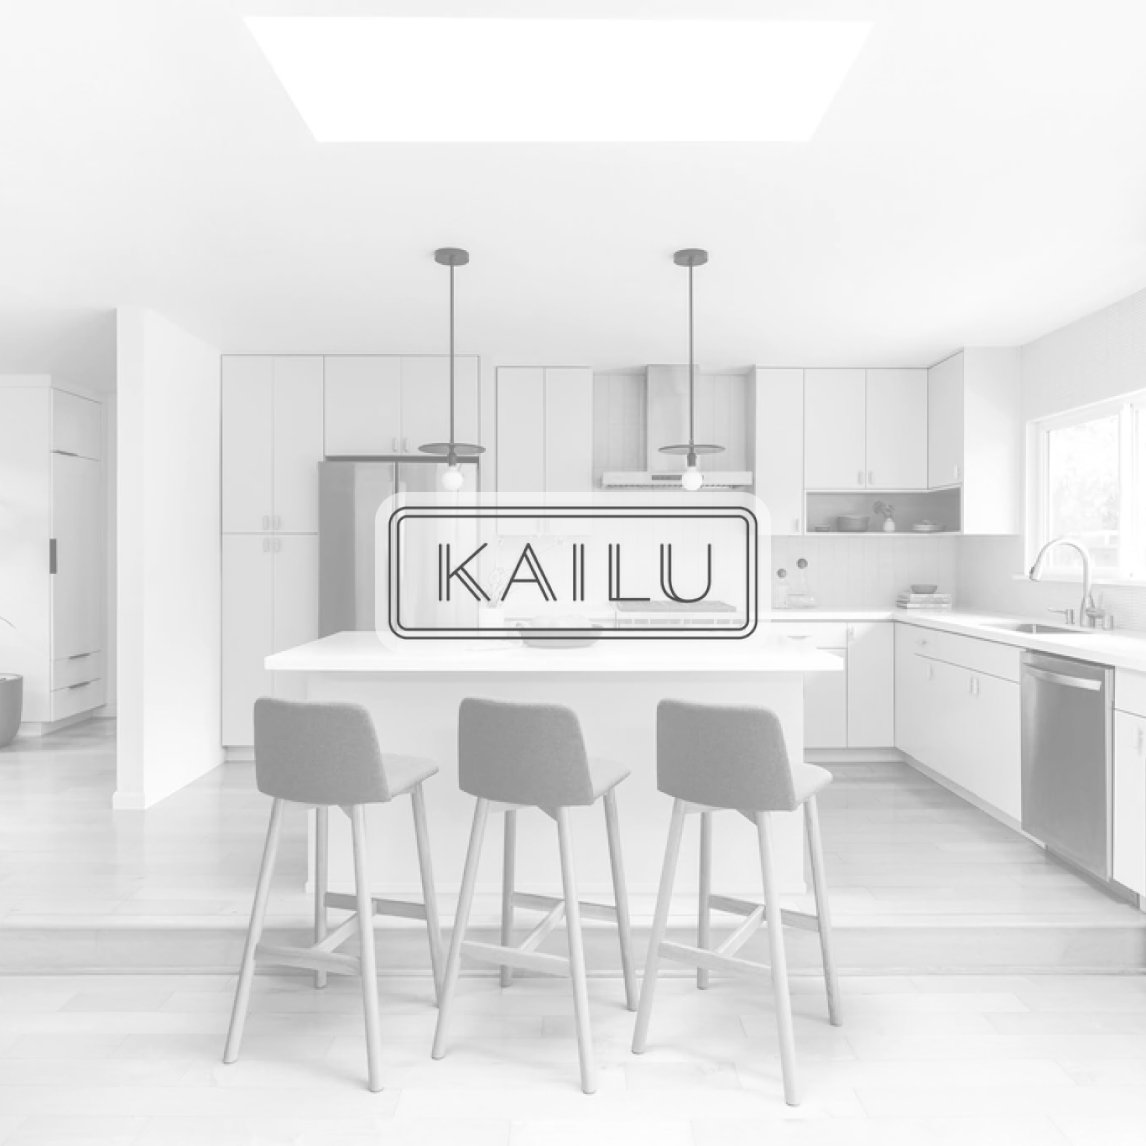  https://www.kailusilk.com/blogs/openroad/4-asian-americans-on-sharing-their-roots-through-interior-design 